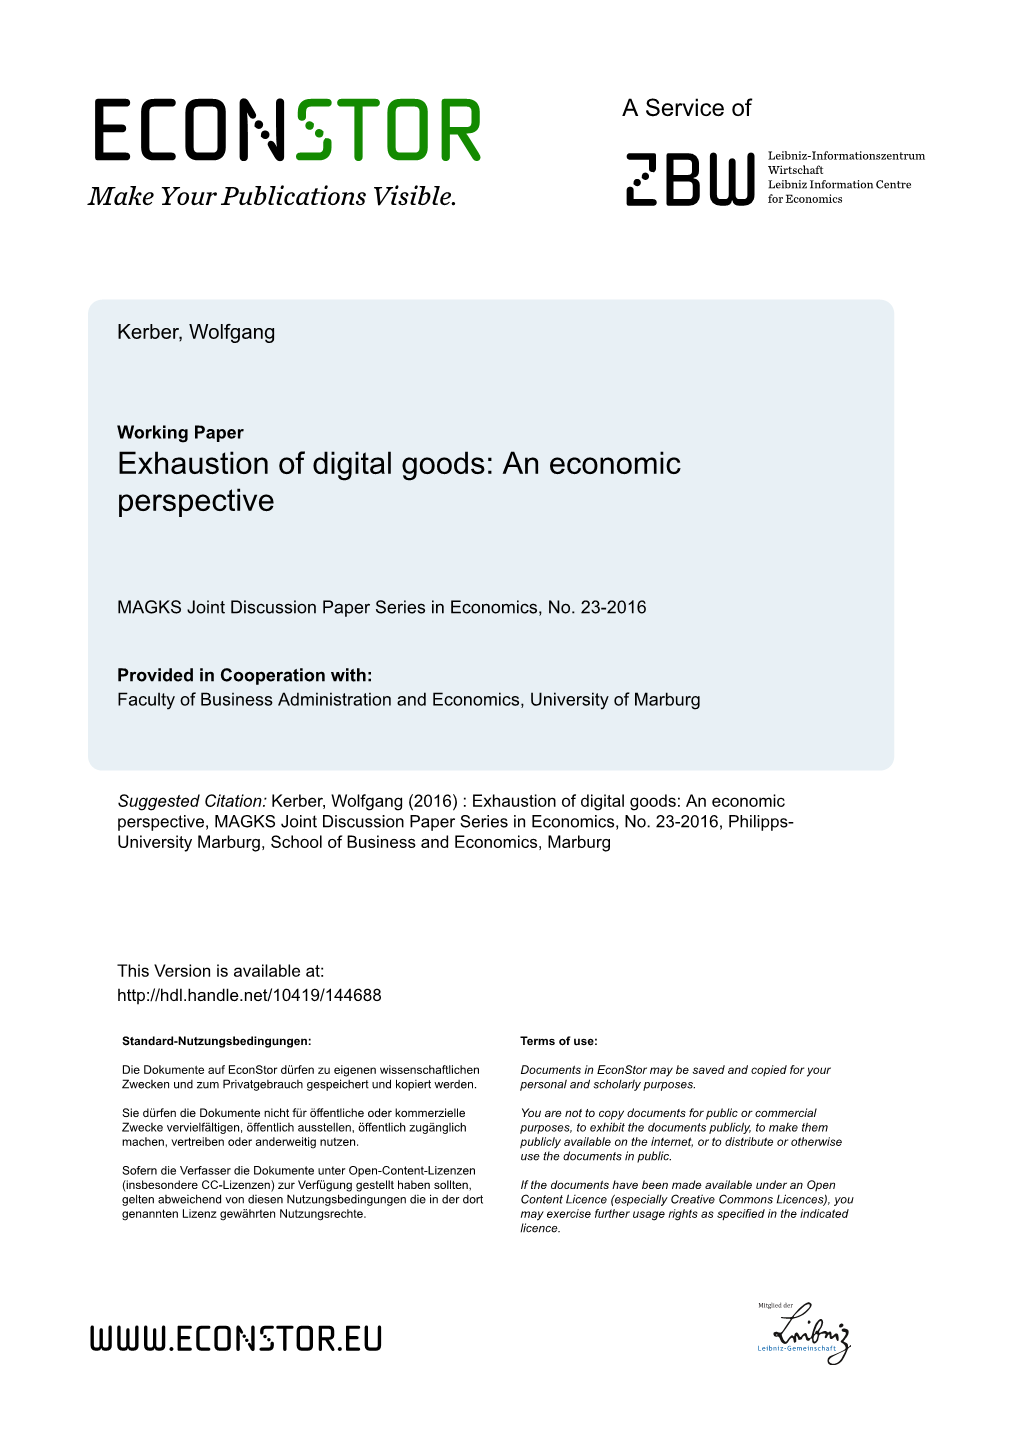 Exhaustion of Digital Goods: an Economic Perspective